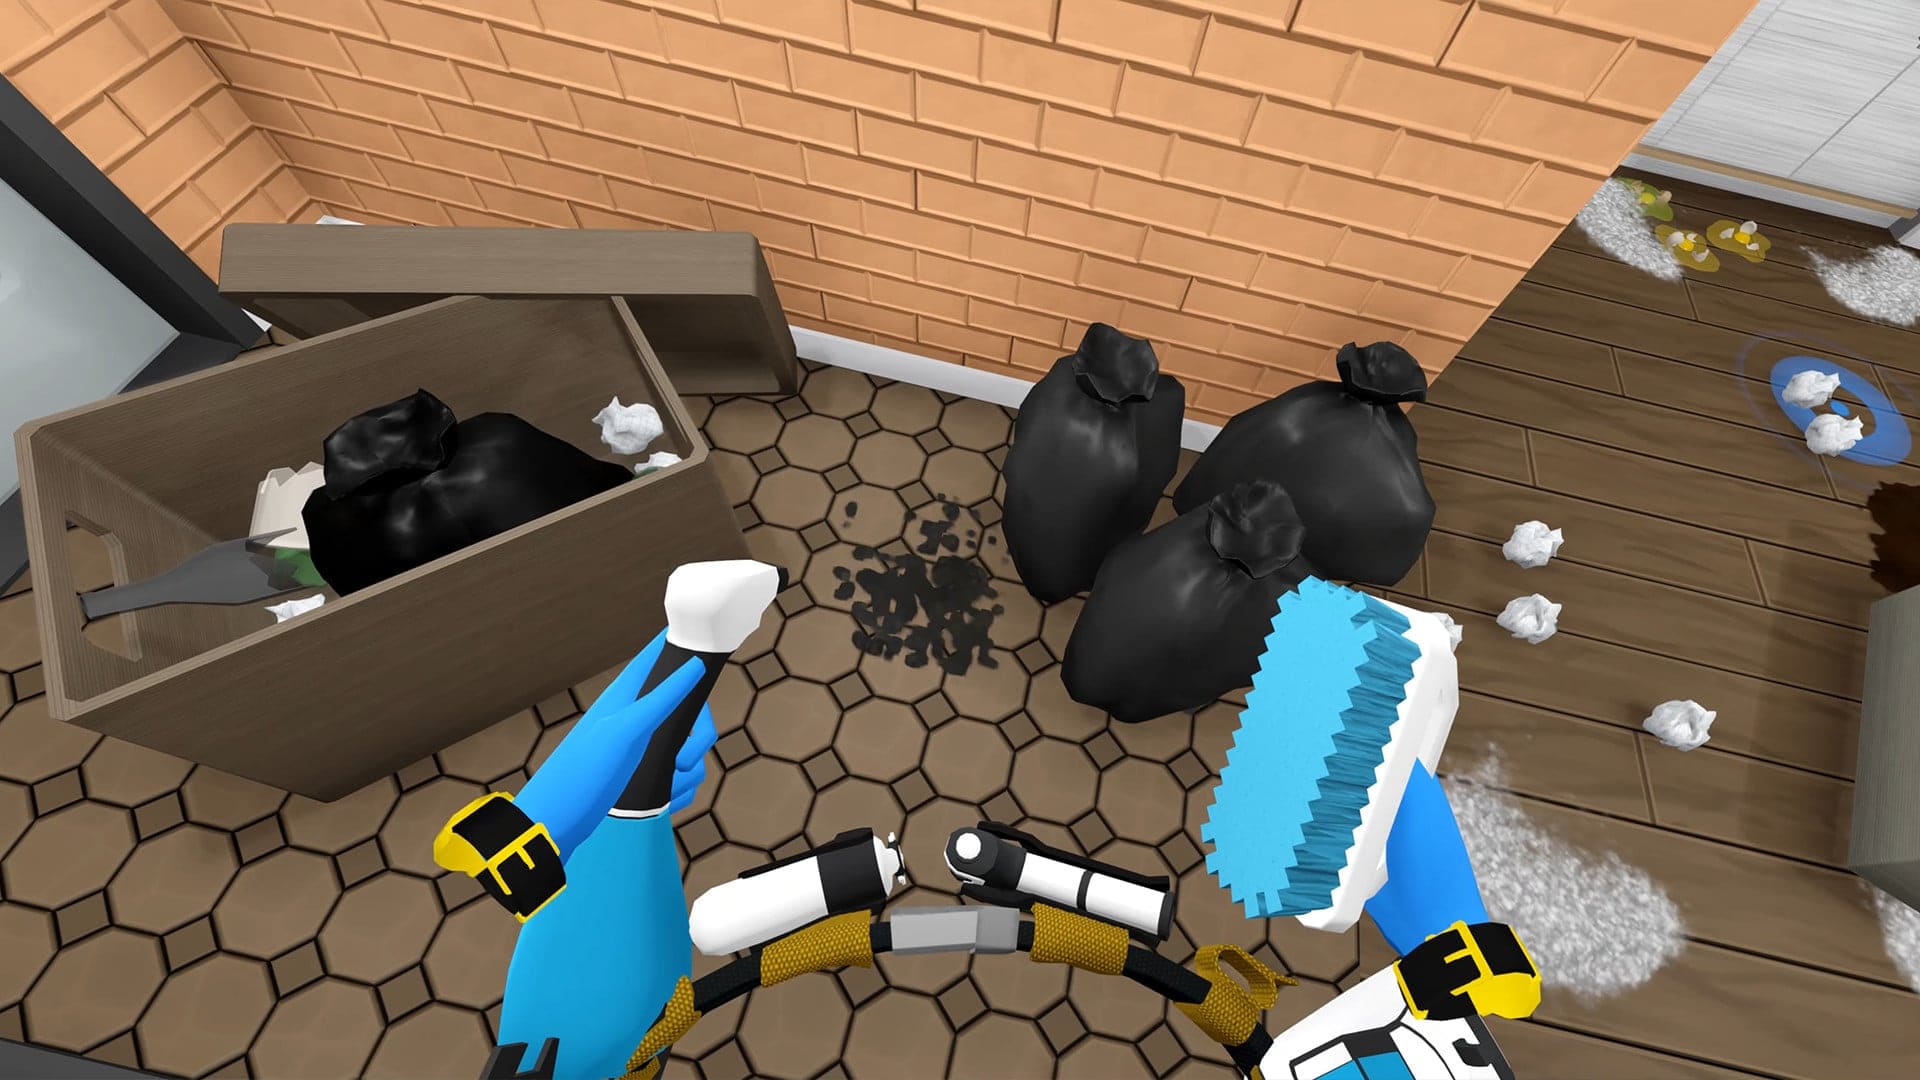 House Flipper VR — clean up and make repairs in virtual reality